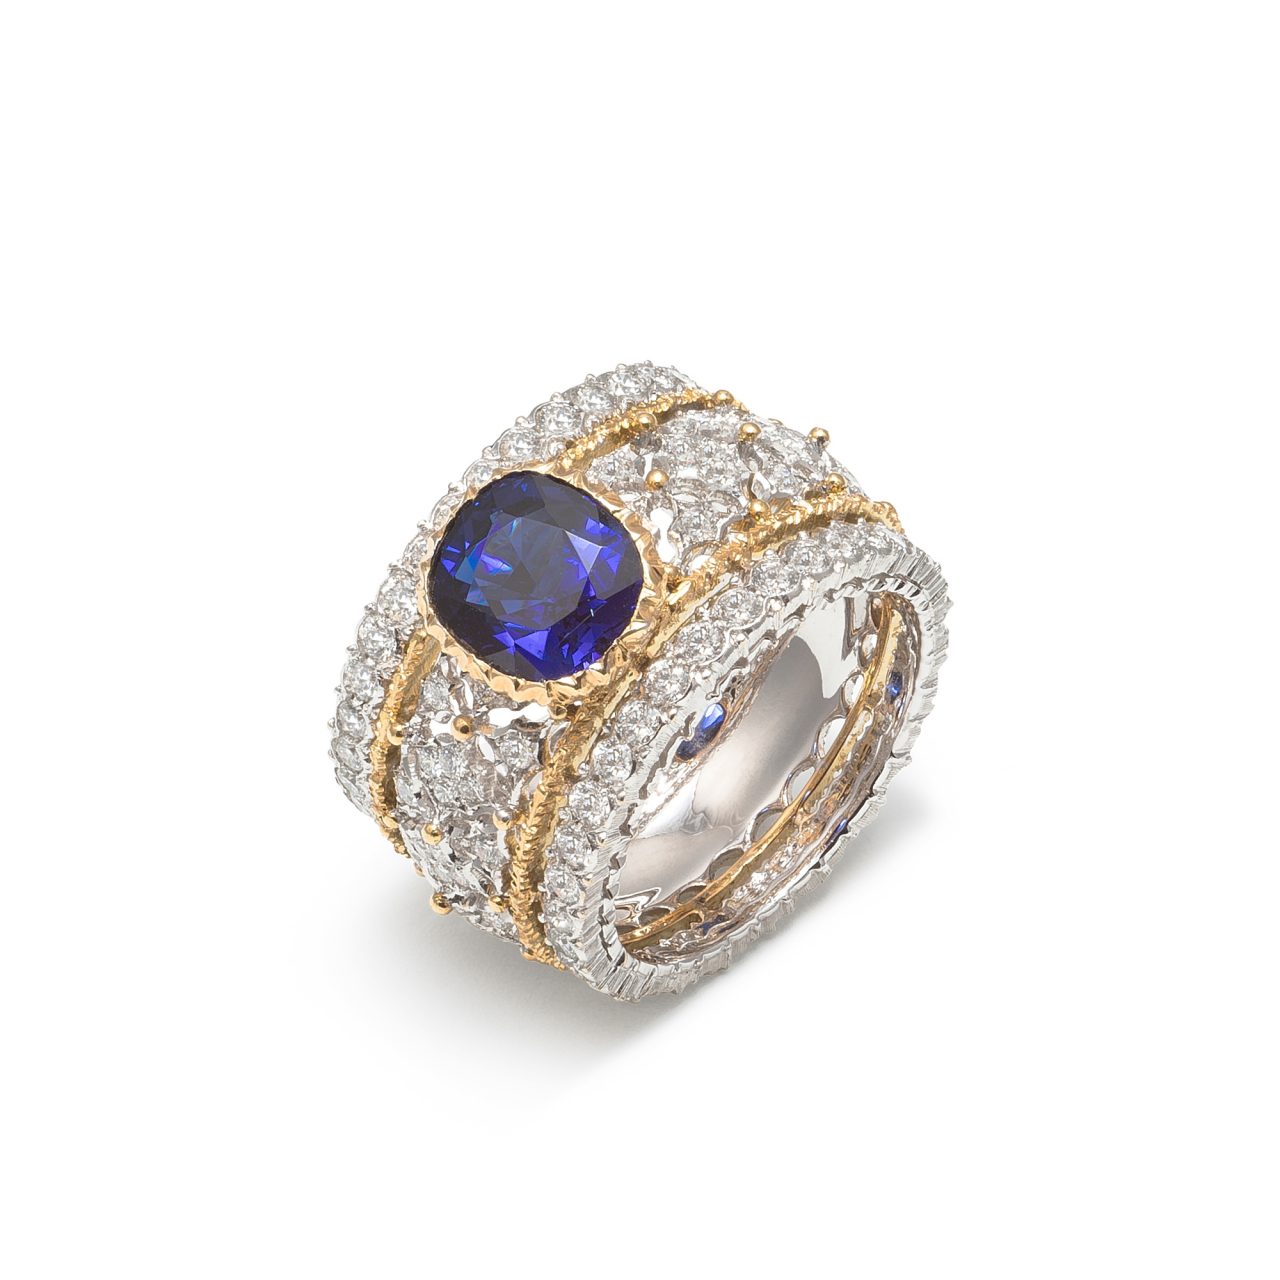 Buccellati 18k white and yellow gold ring with Sapphire and Diamonds